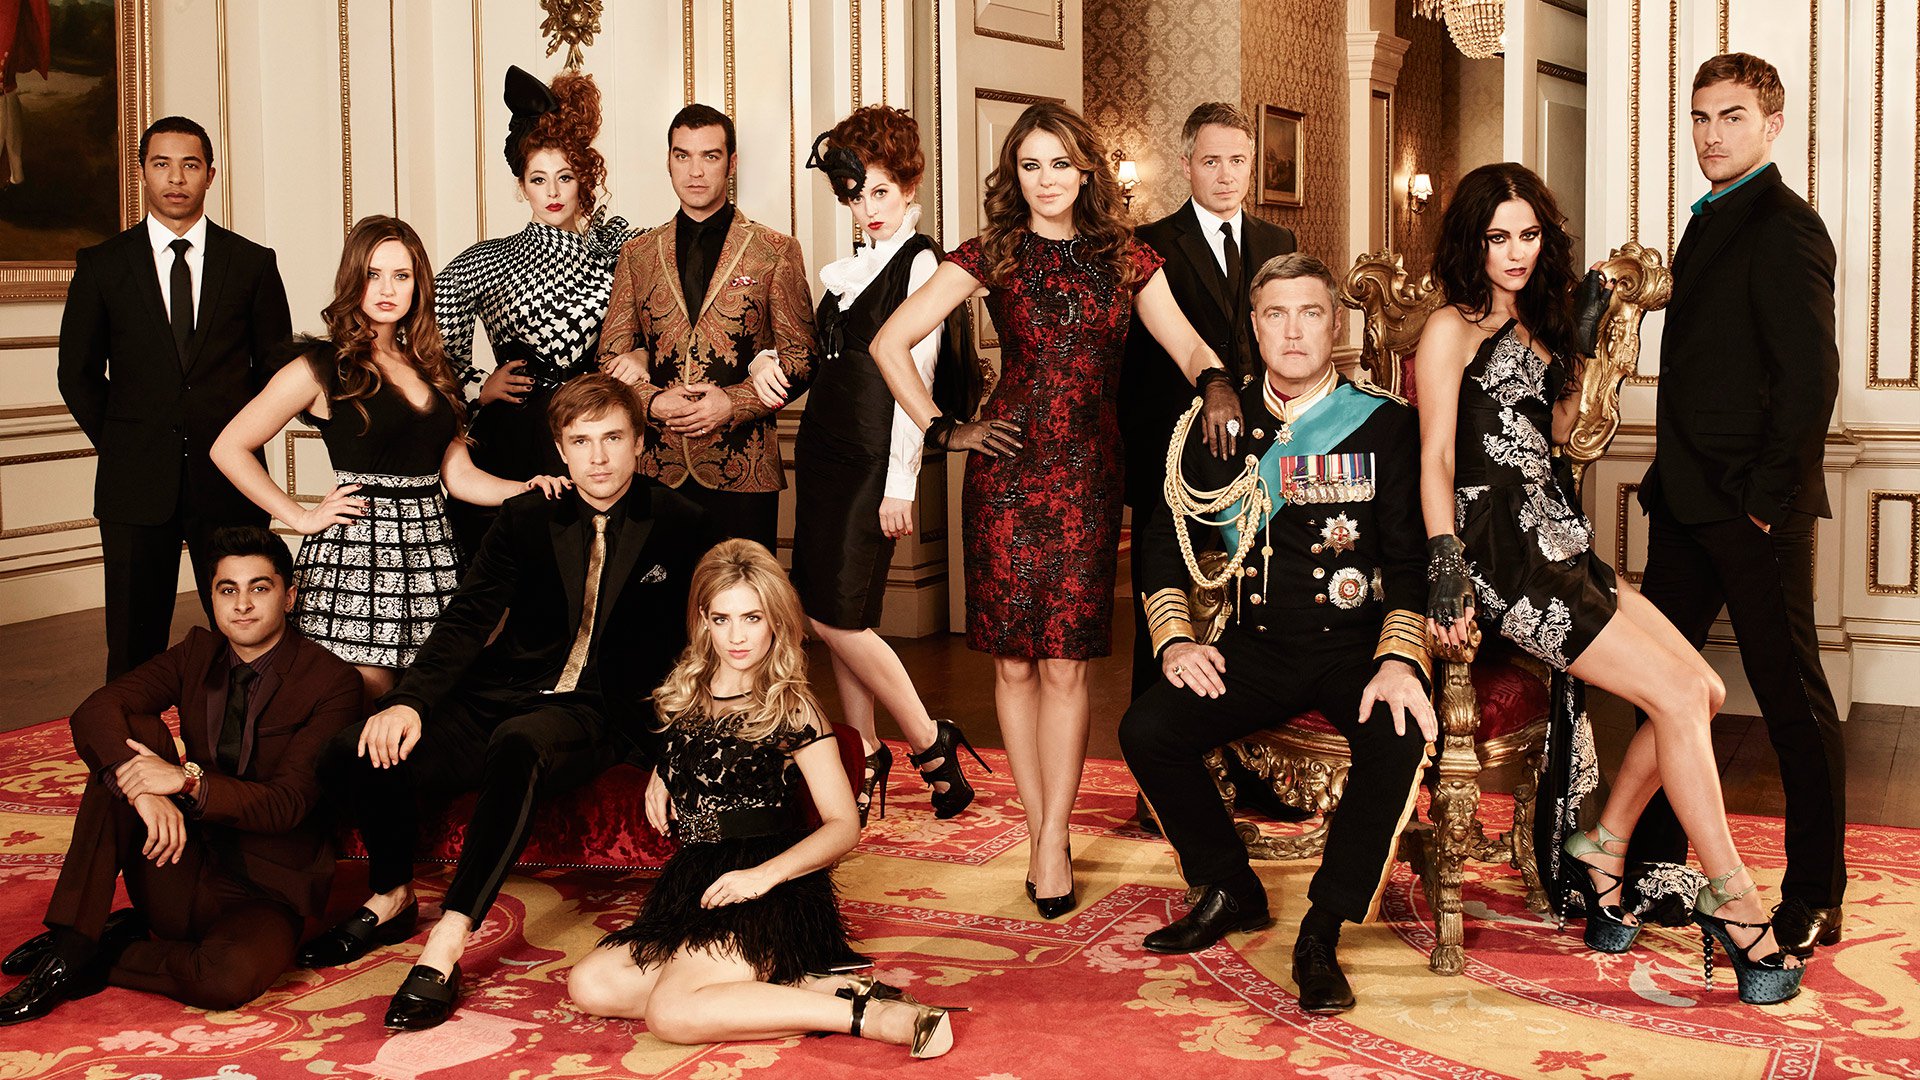 High Resolution Wallpaper | The Royals (2015) 1920x1080 px